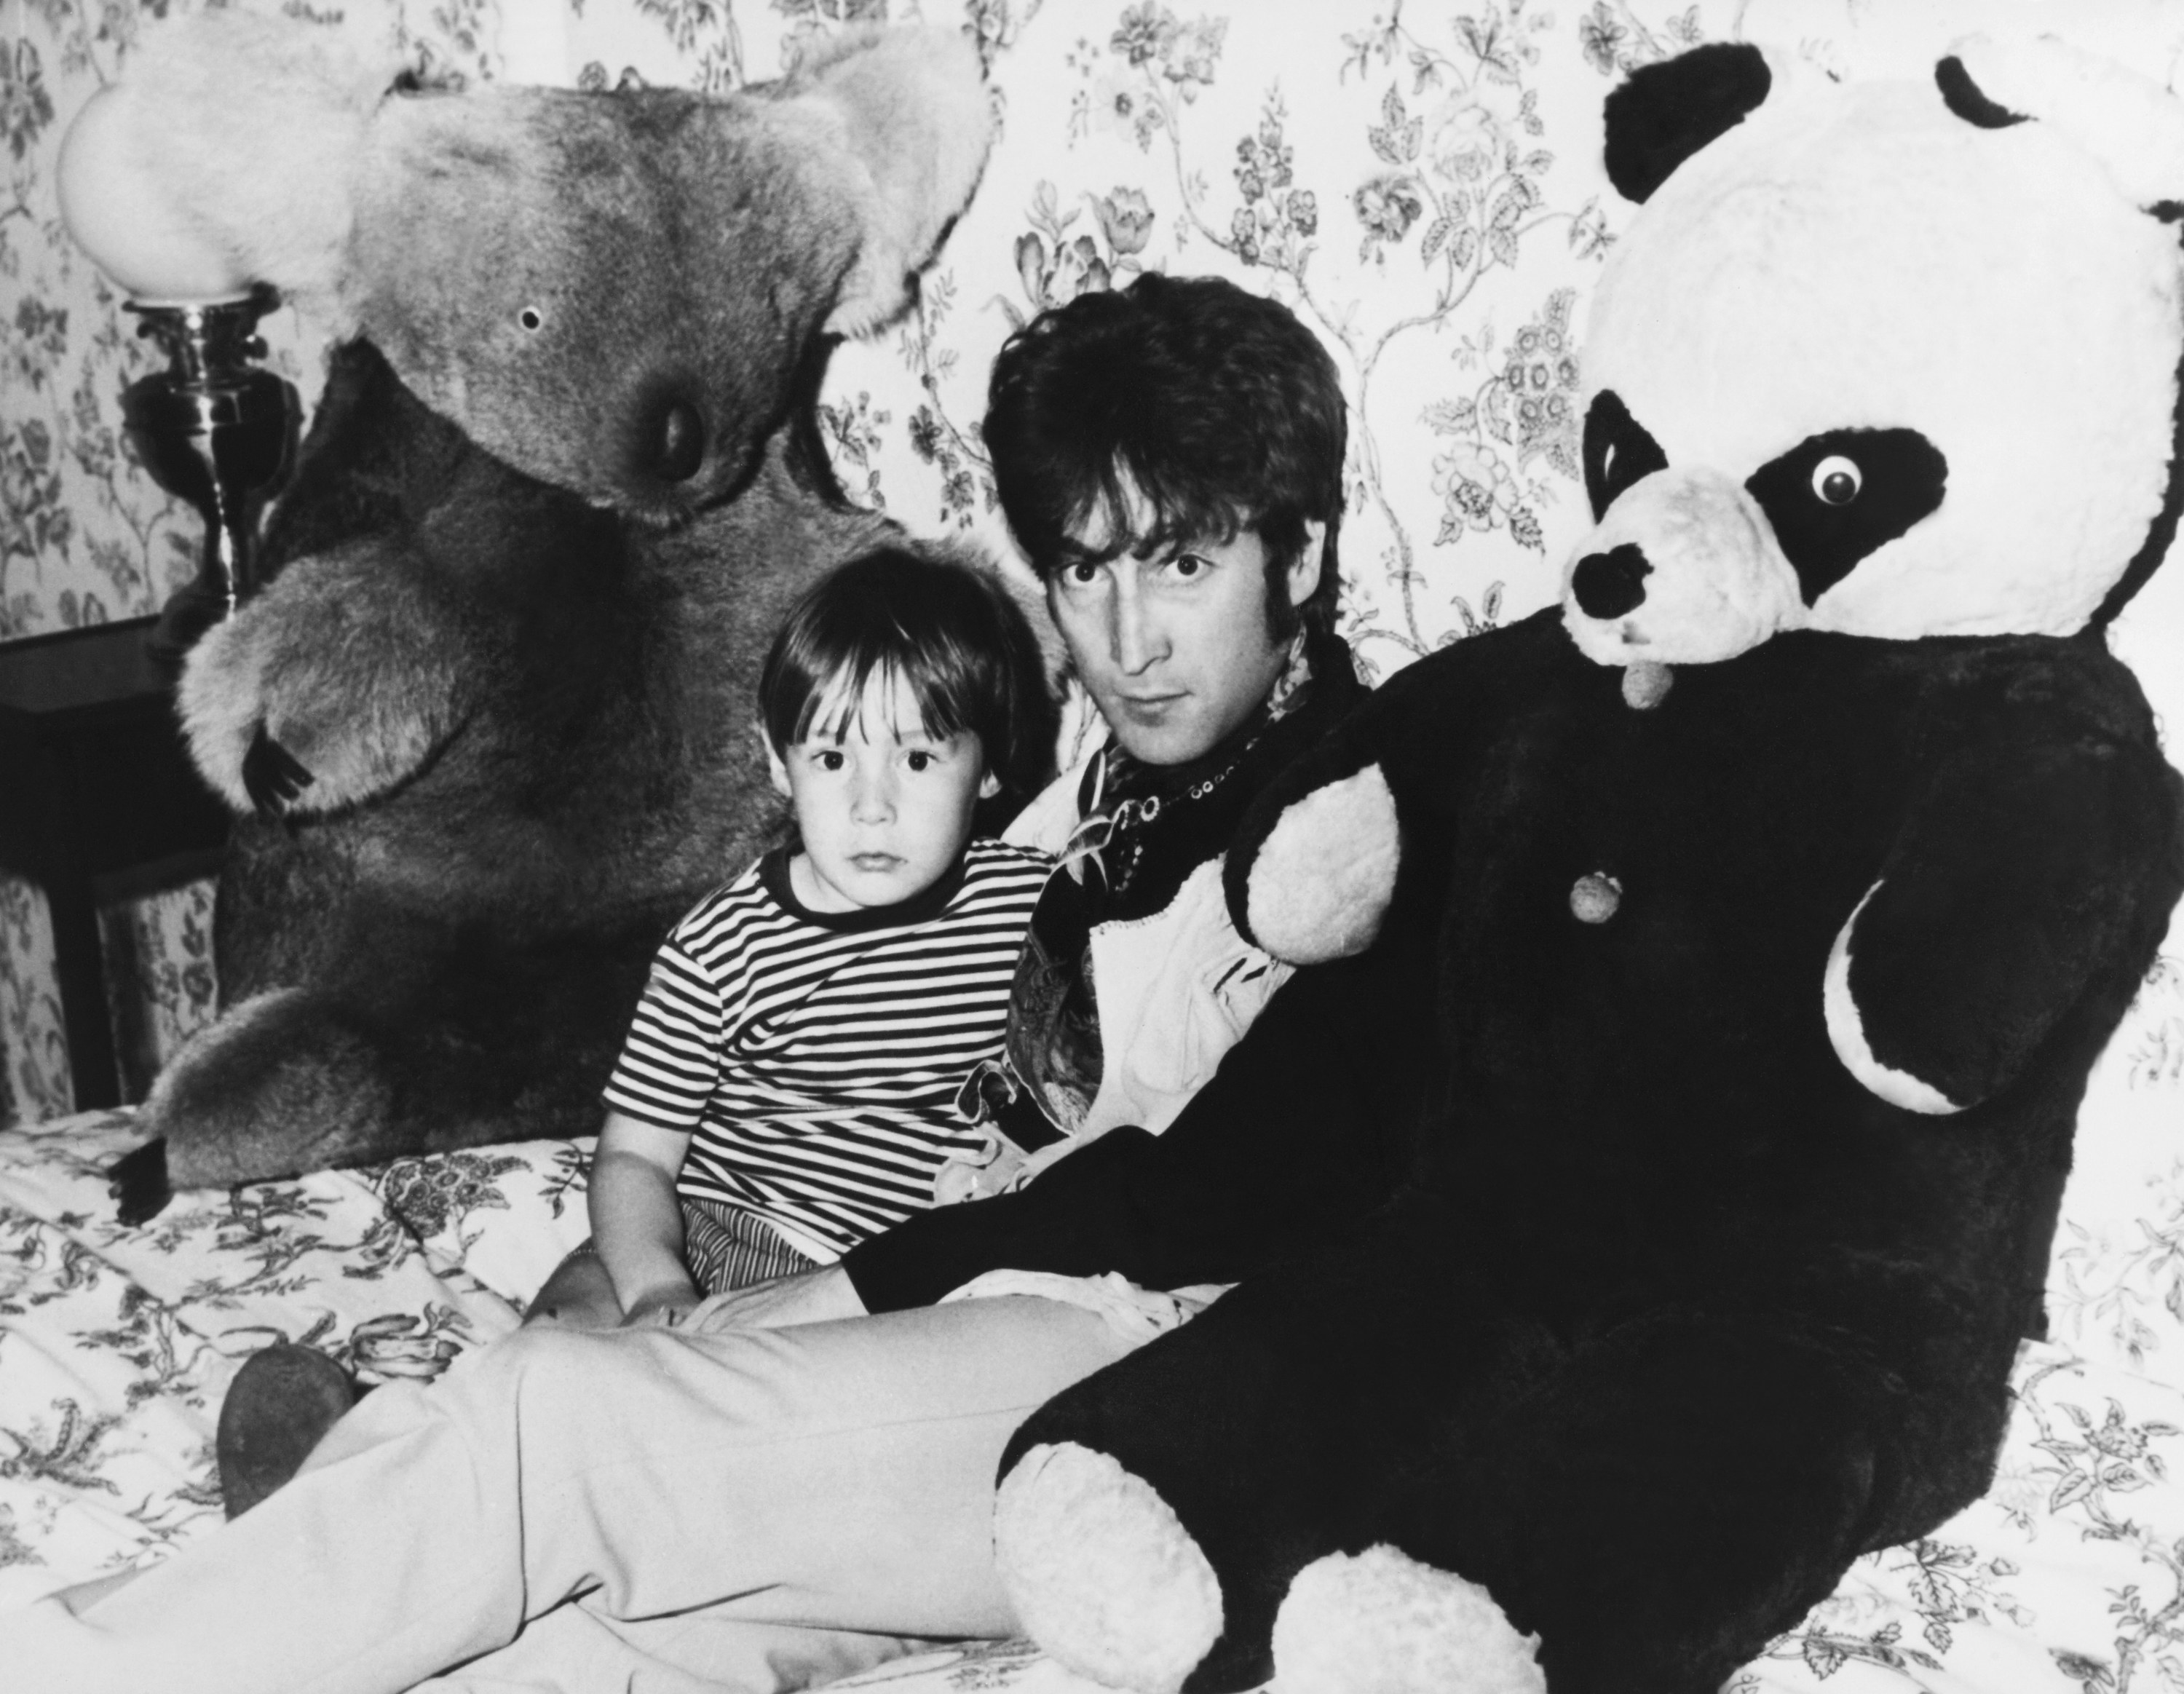 John Lennon and his young son on a bed with floral pattern sheets sitting between two giant stuffed bears